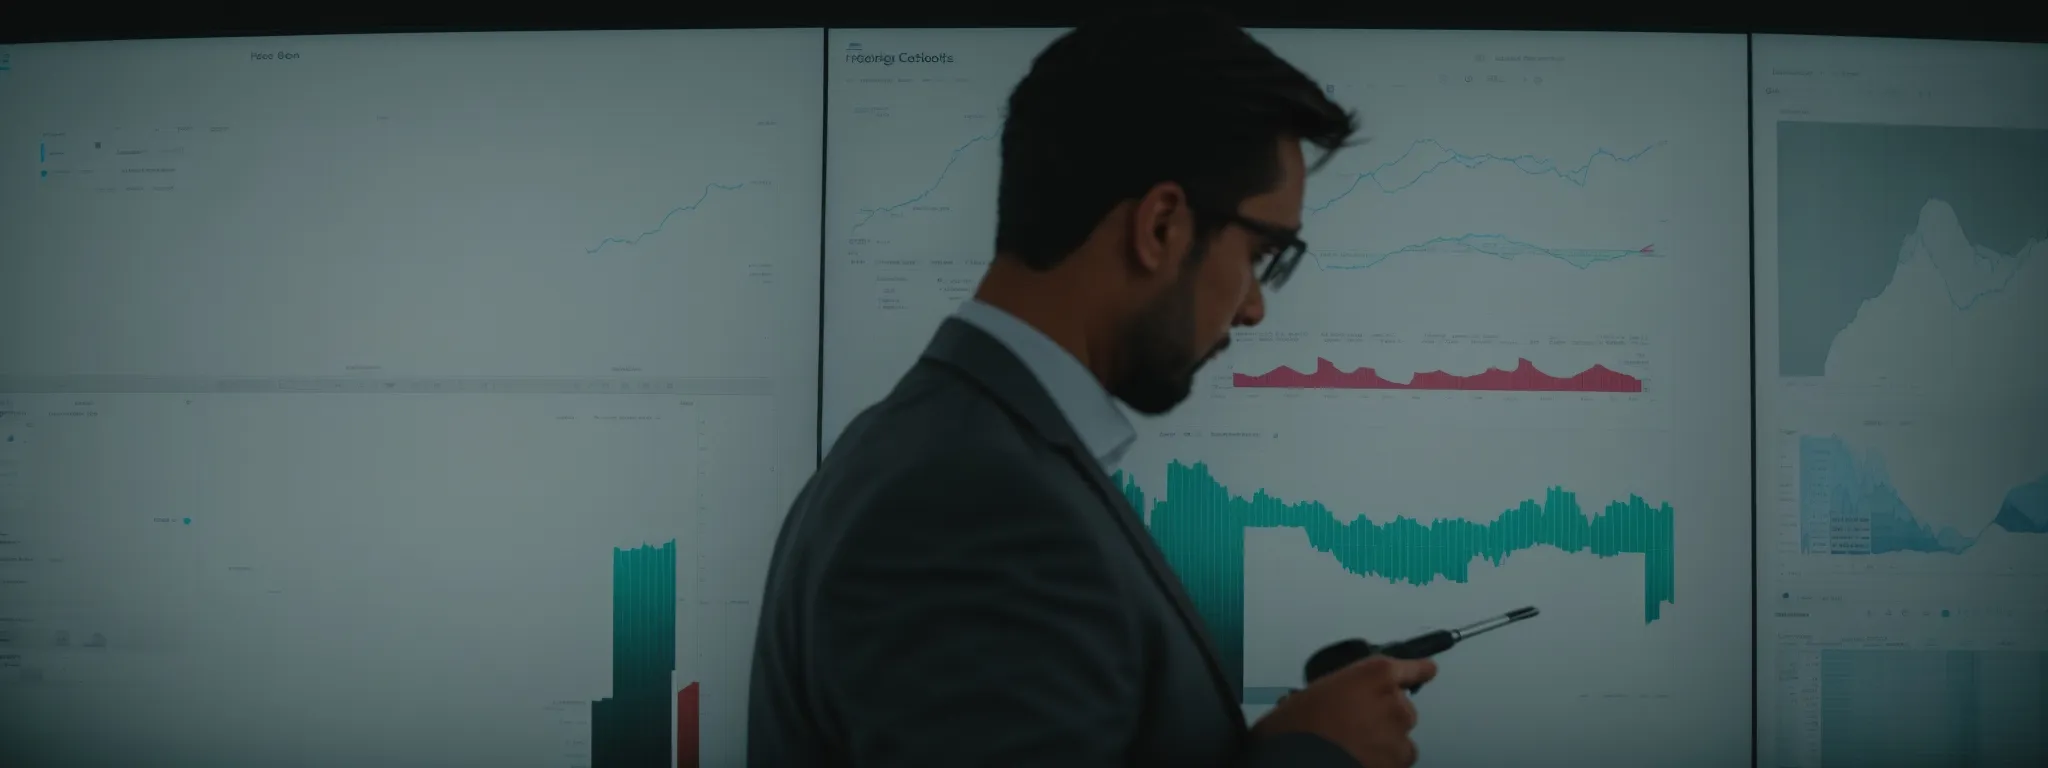 a professional analyzing a graph comparing various seo tools on a large screen.